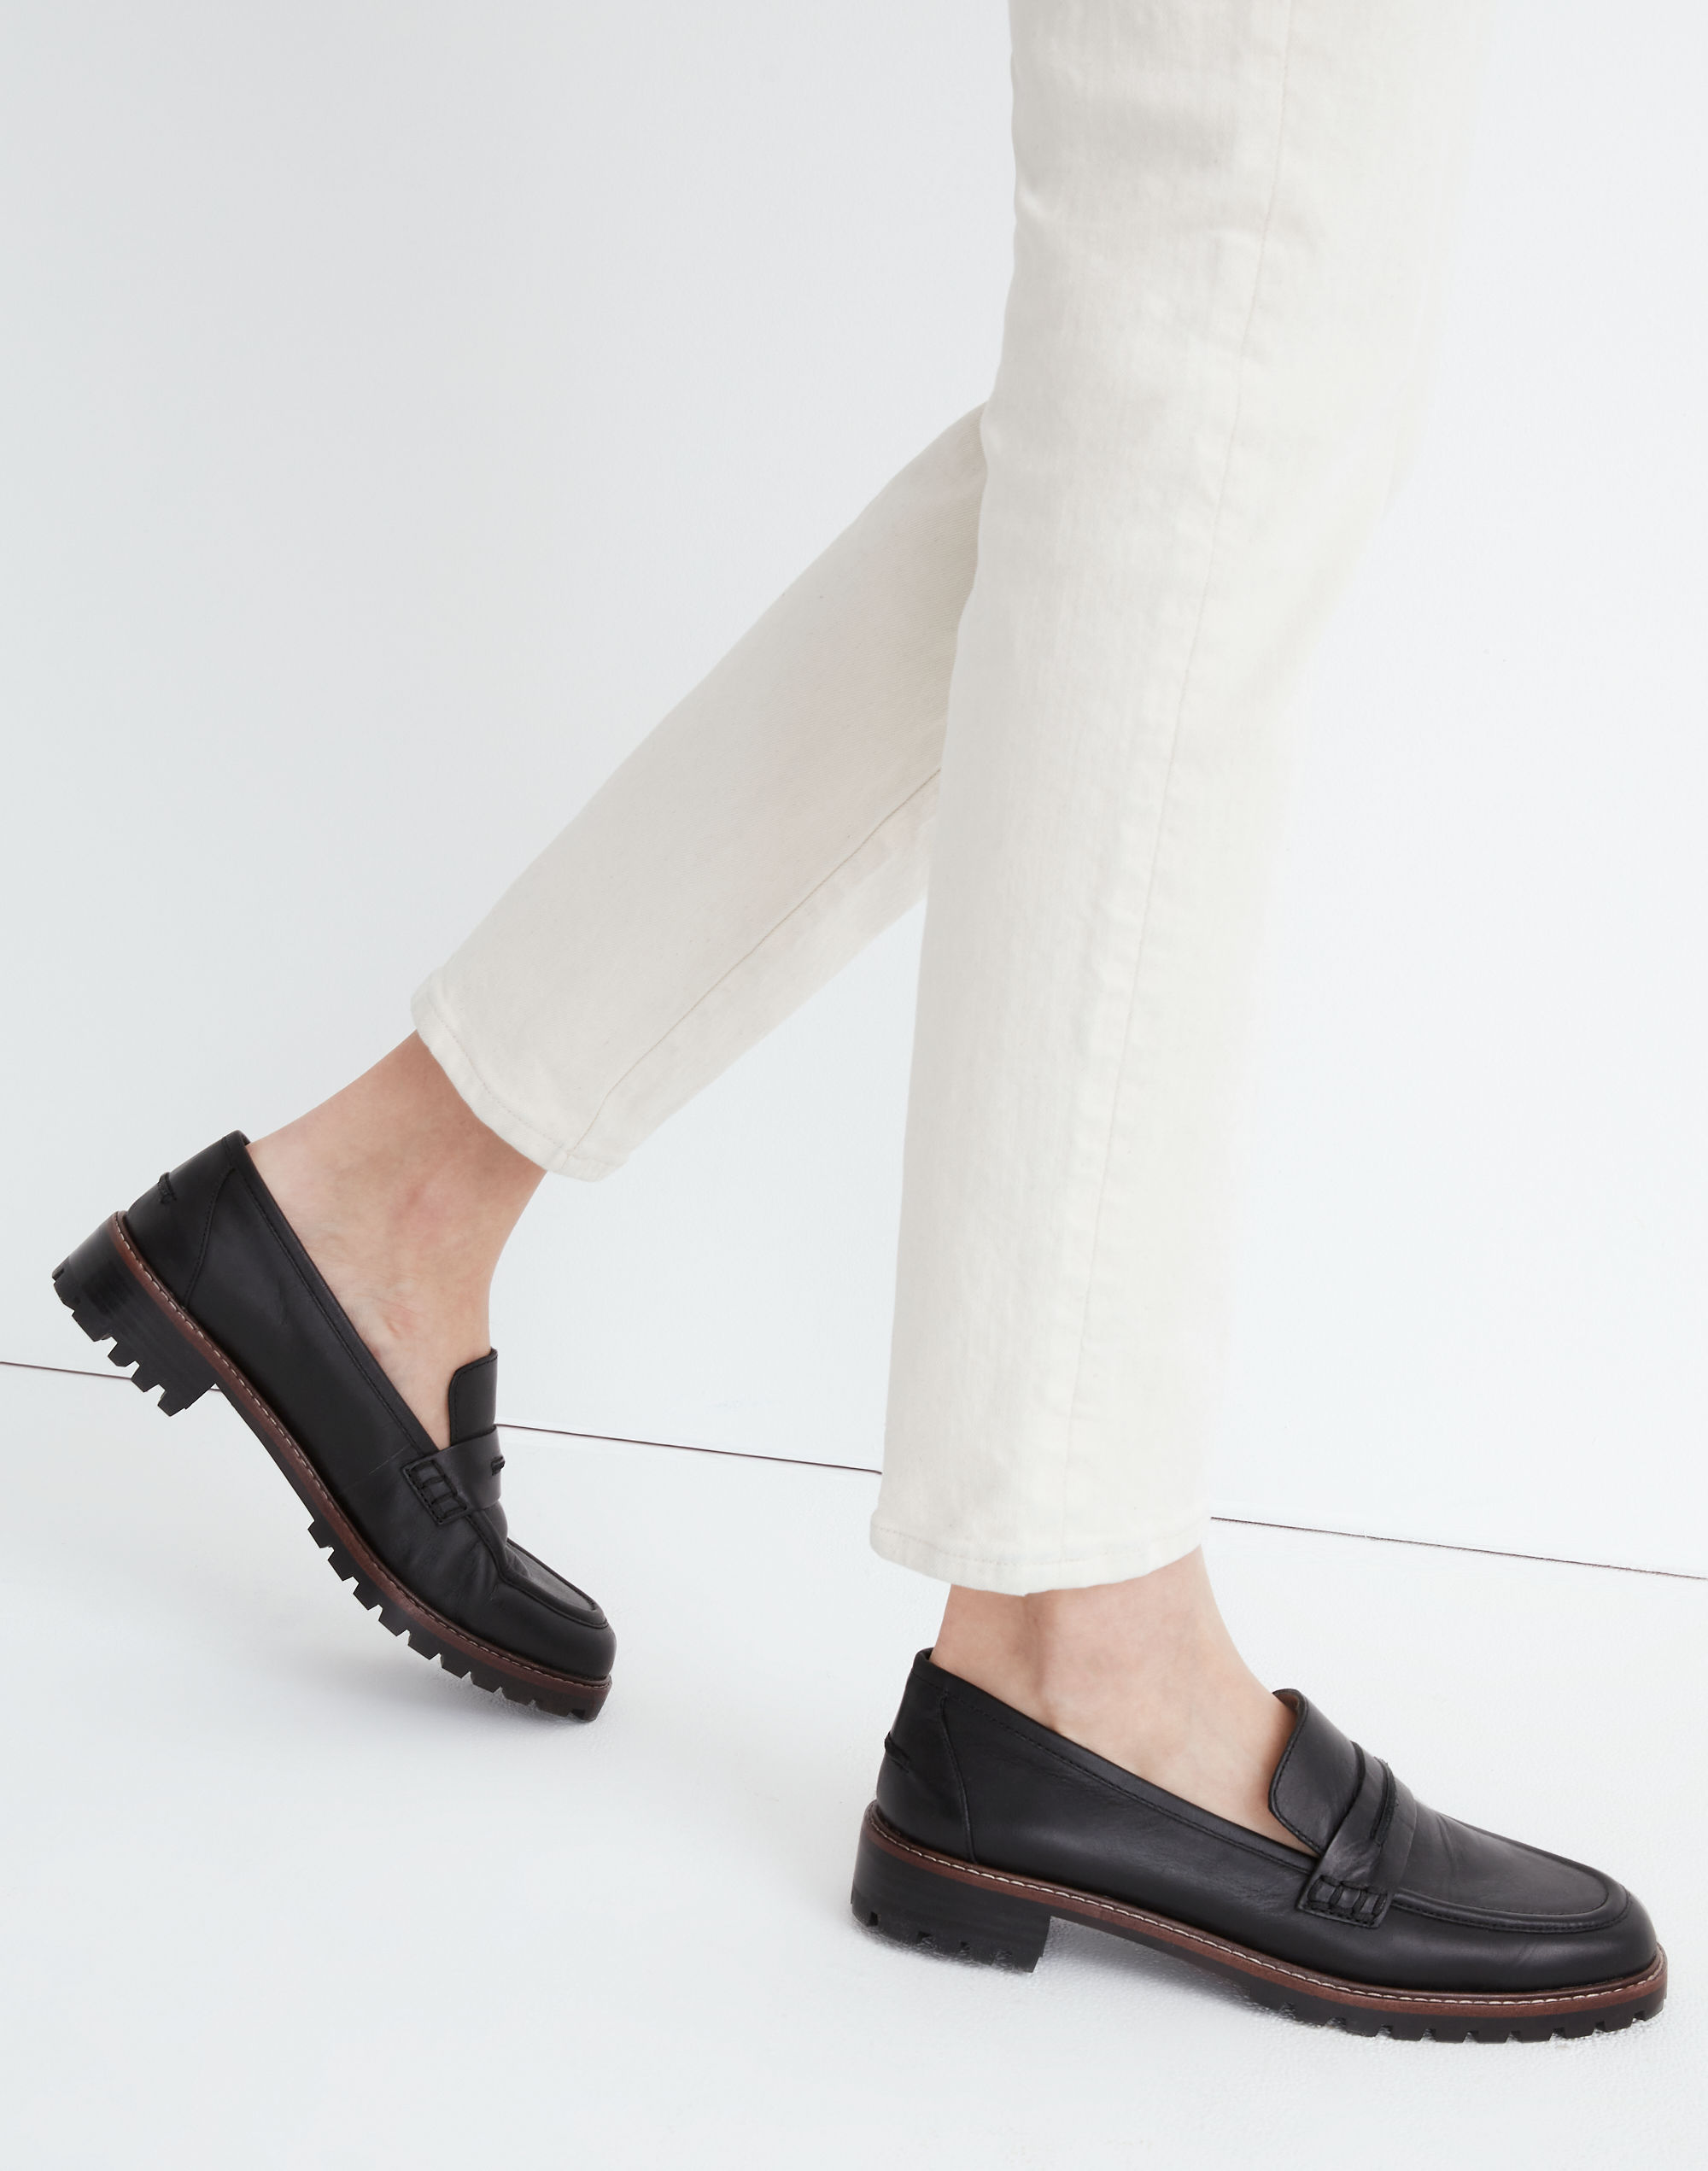 The Corinne Lugsole Loafer